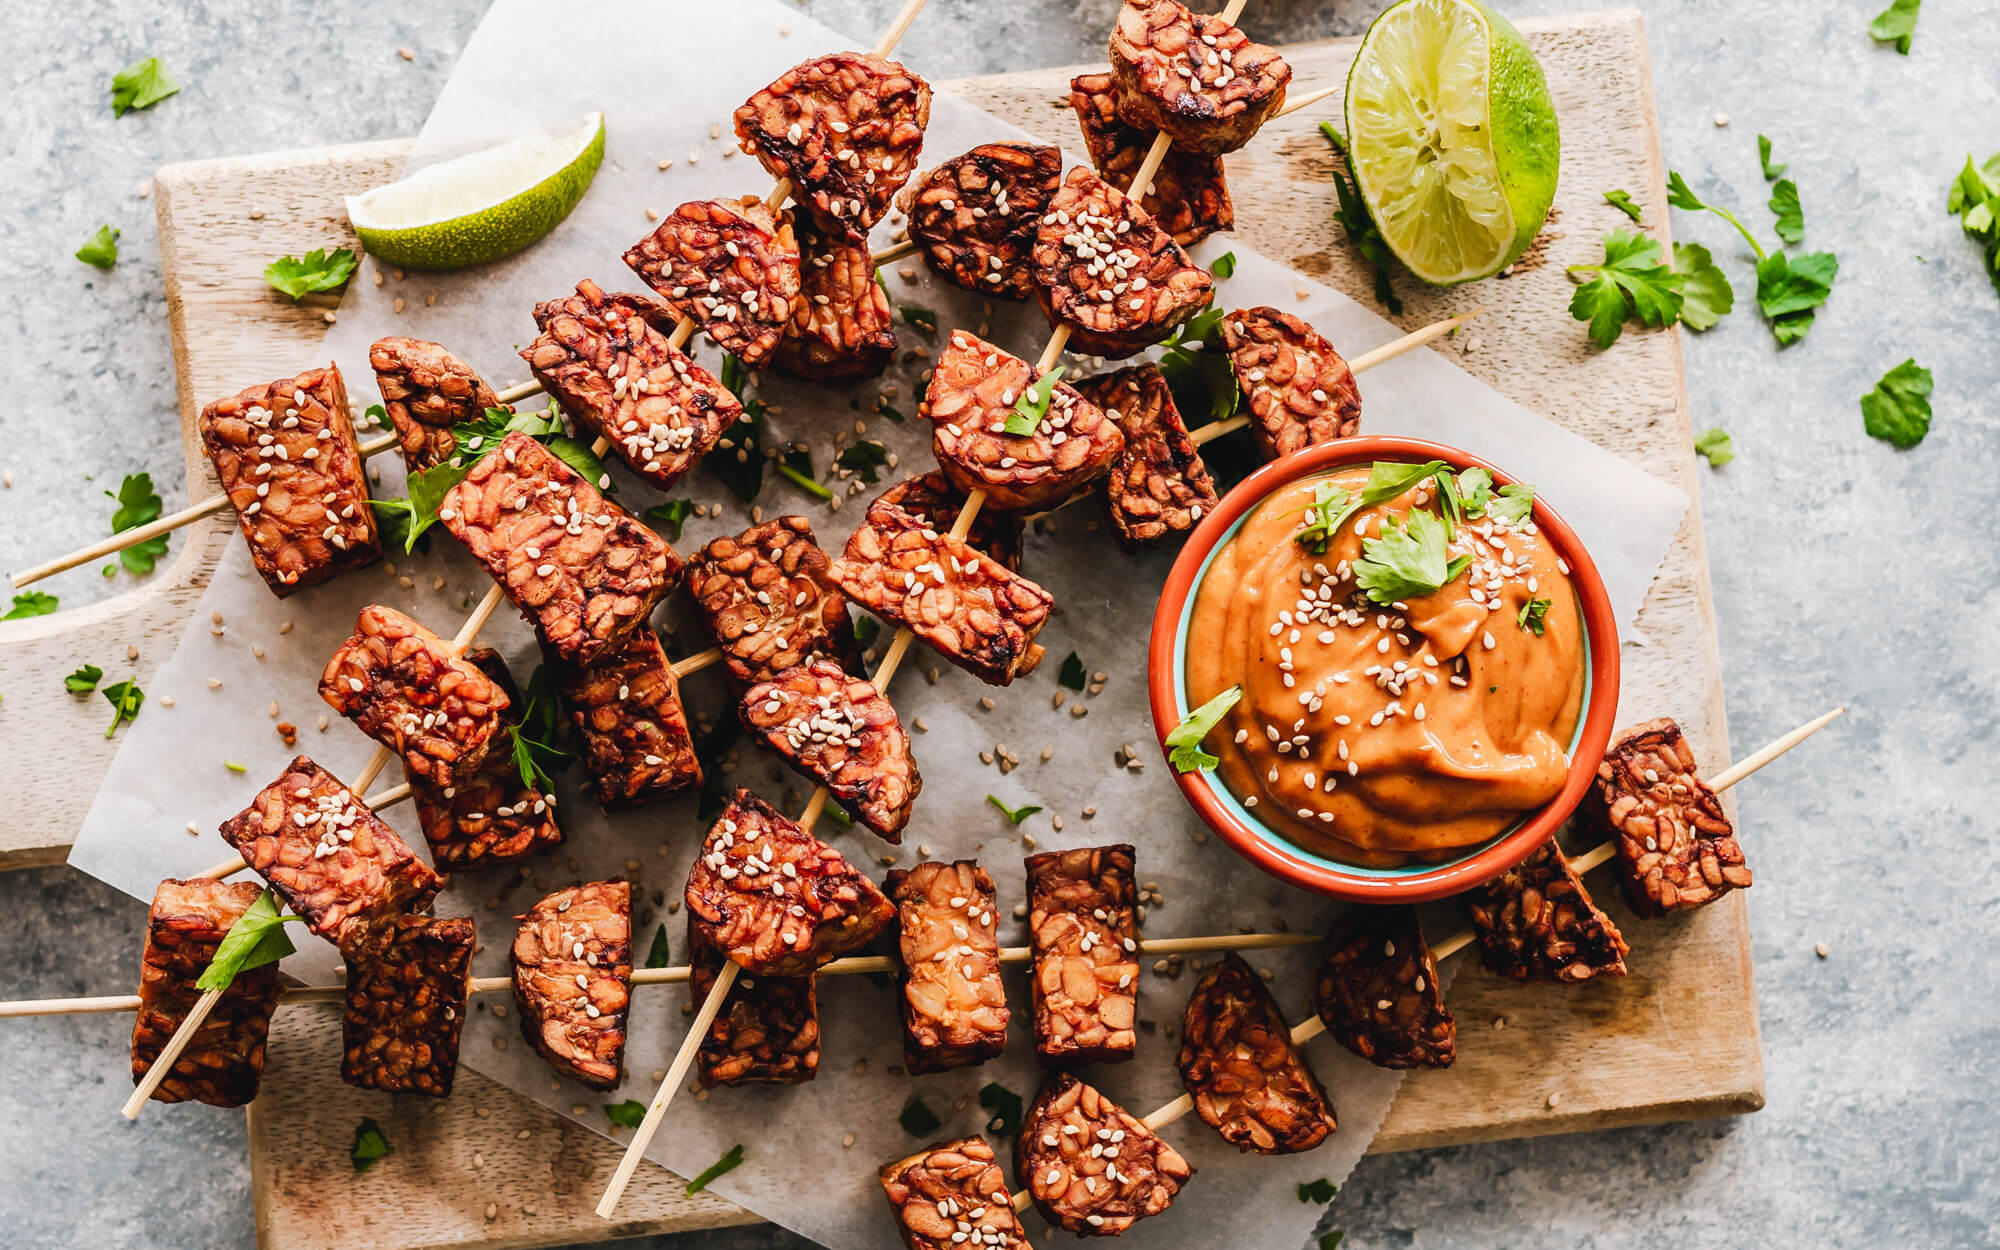 tempeh is rich in soy